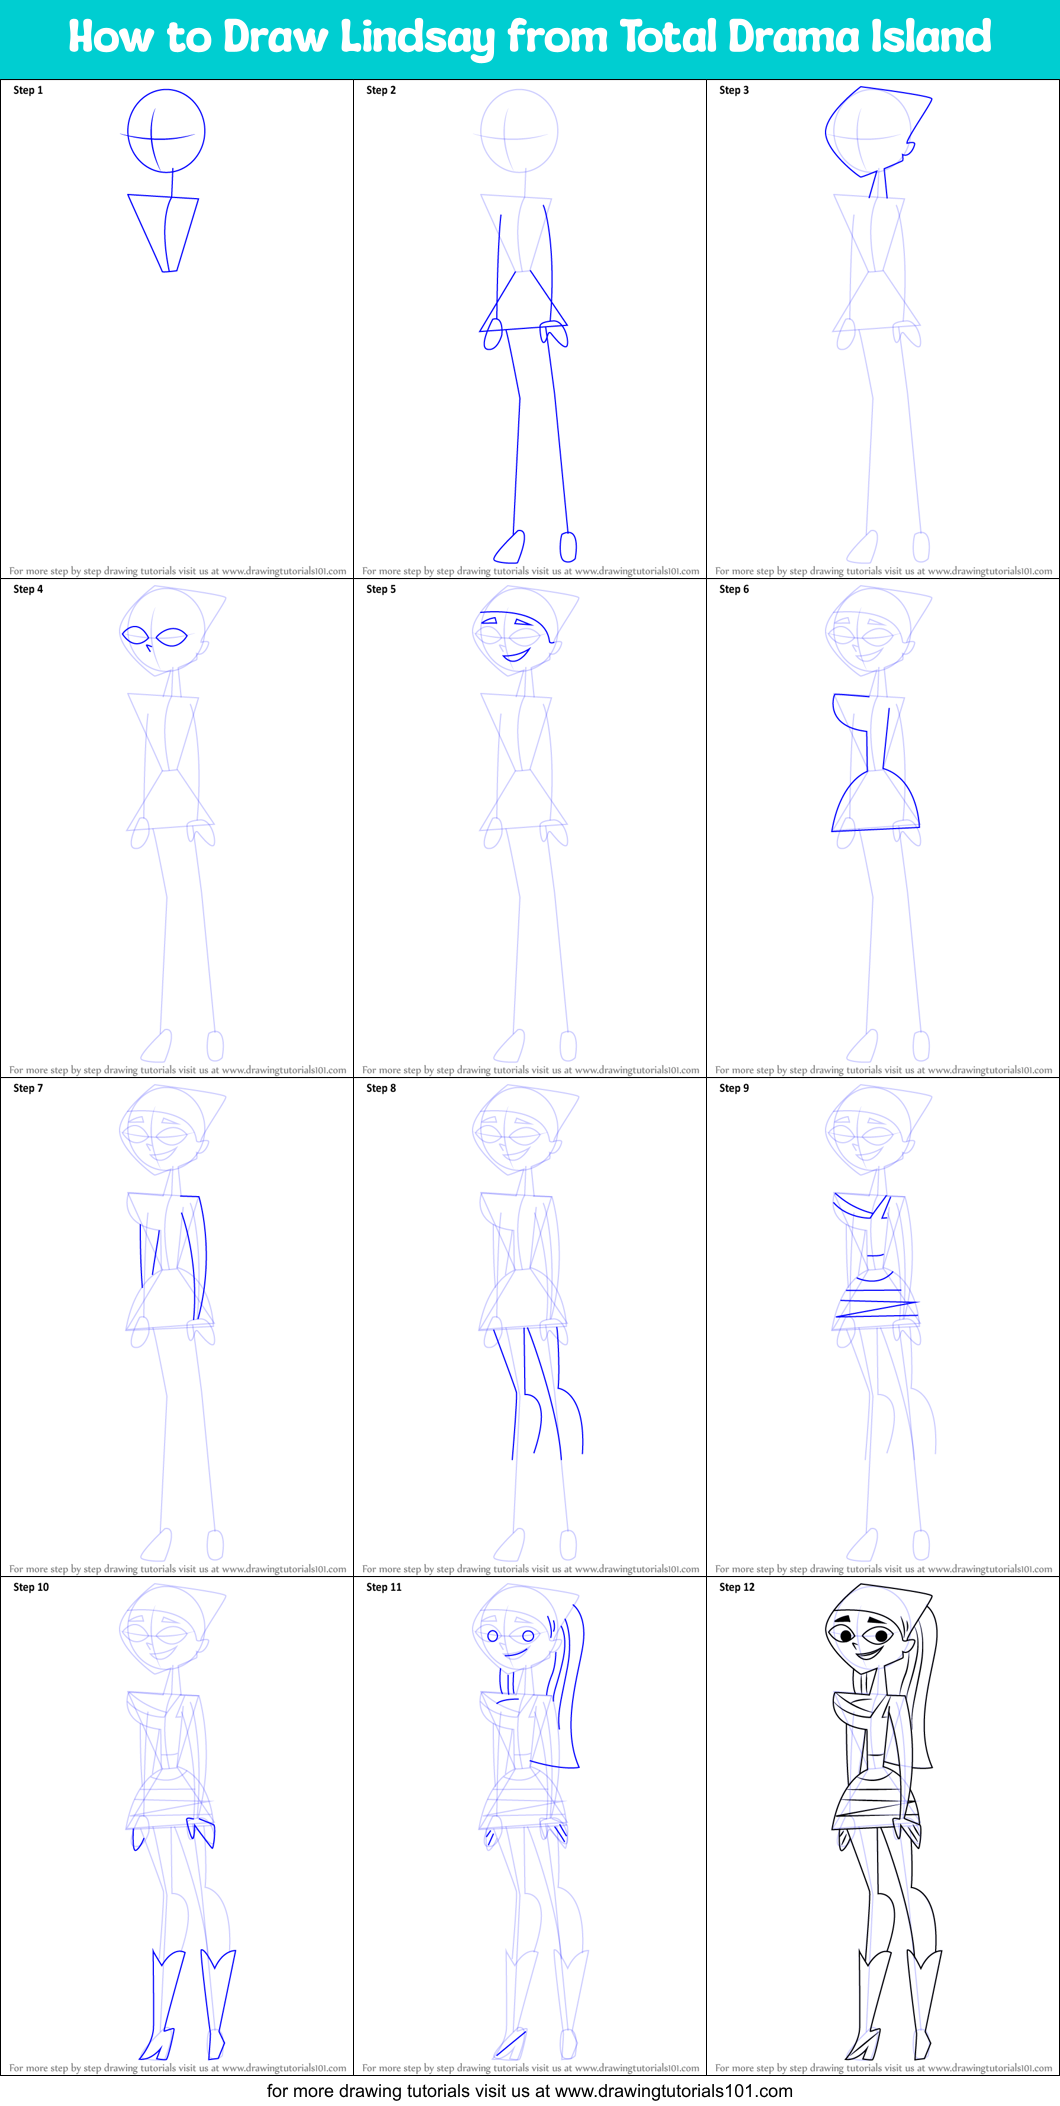 How to Draw Lindsay from Total Drama Island printable step by step